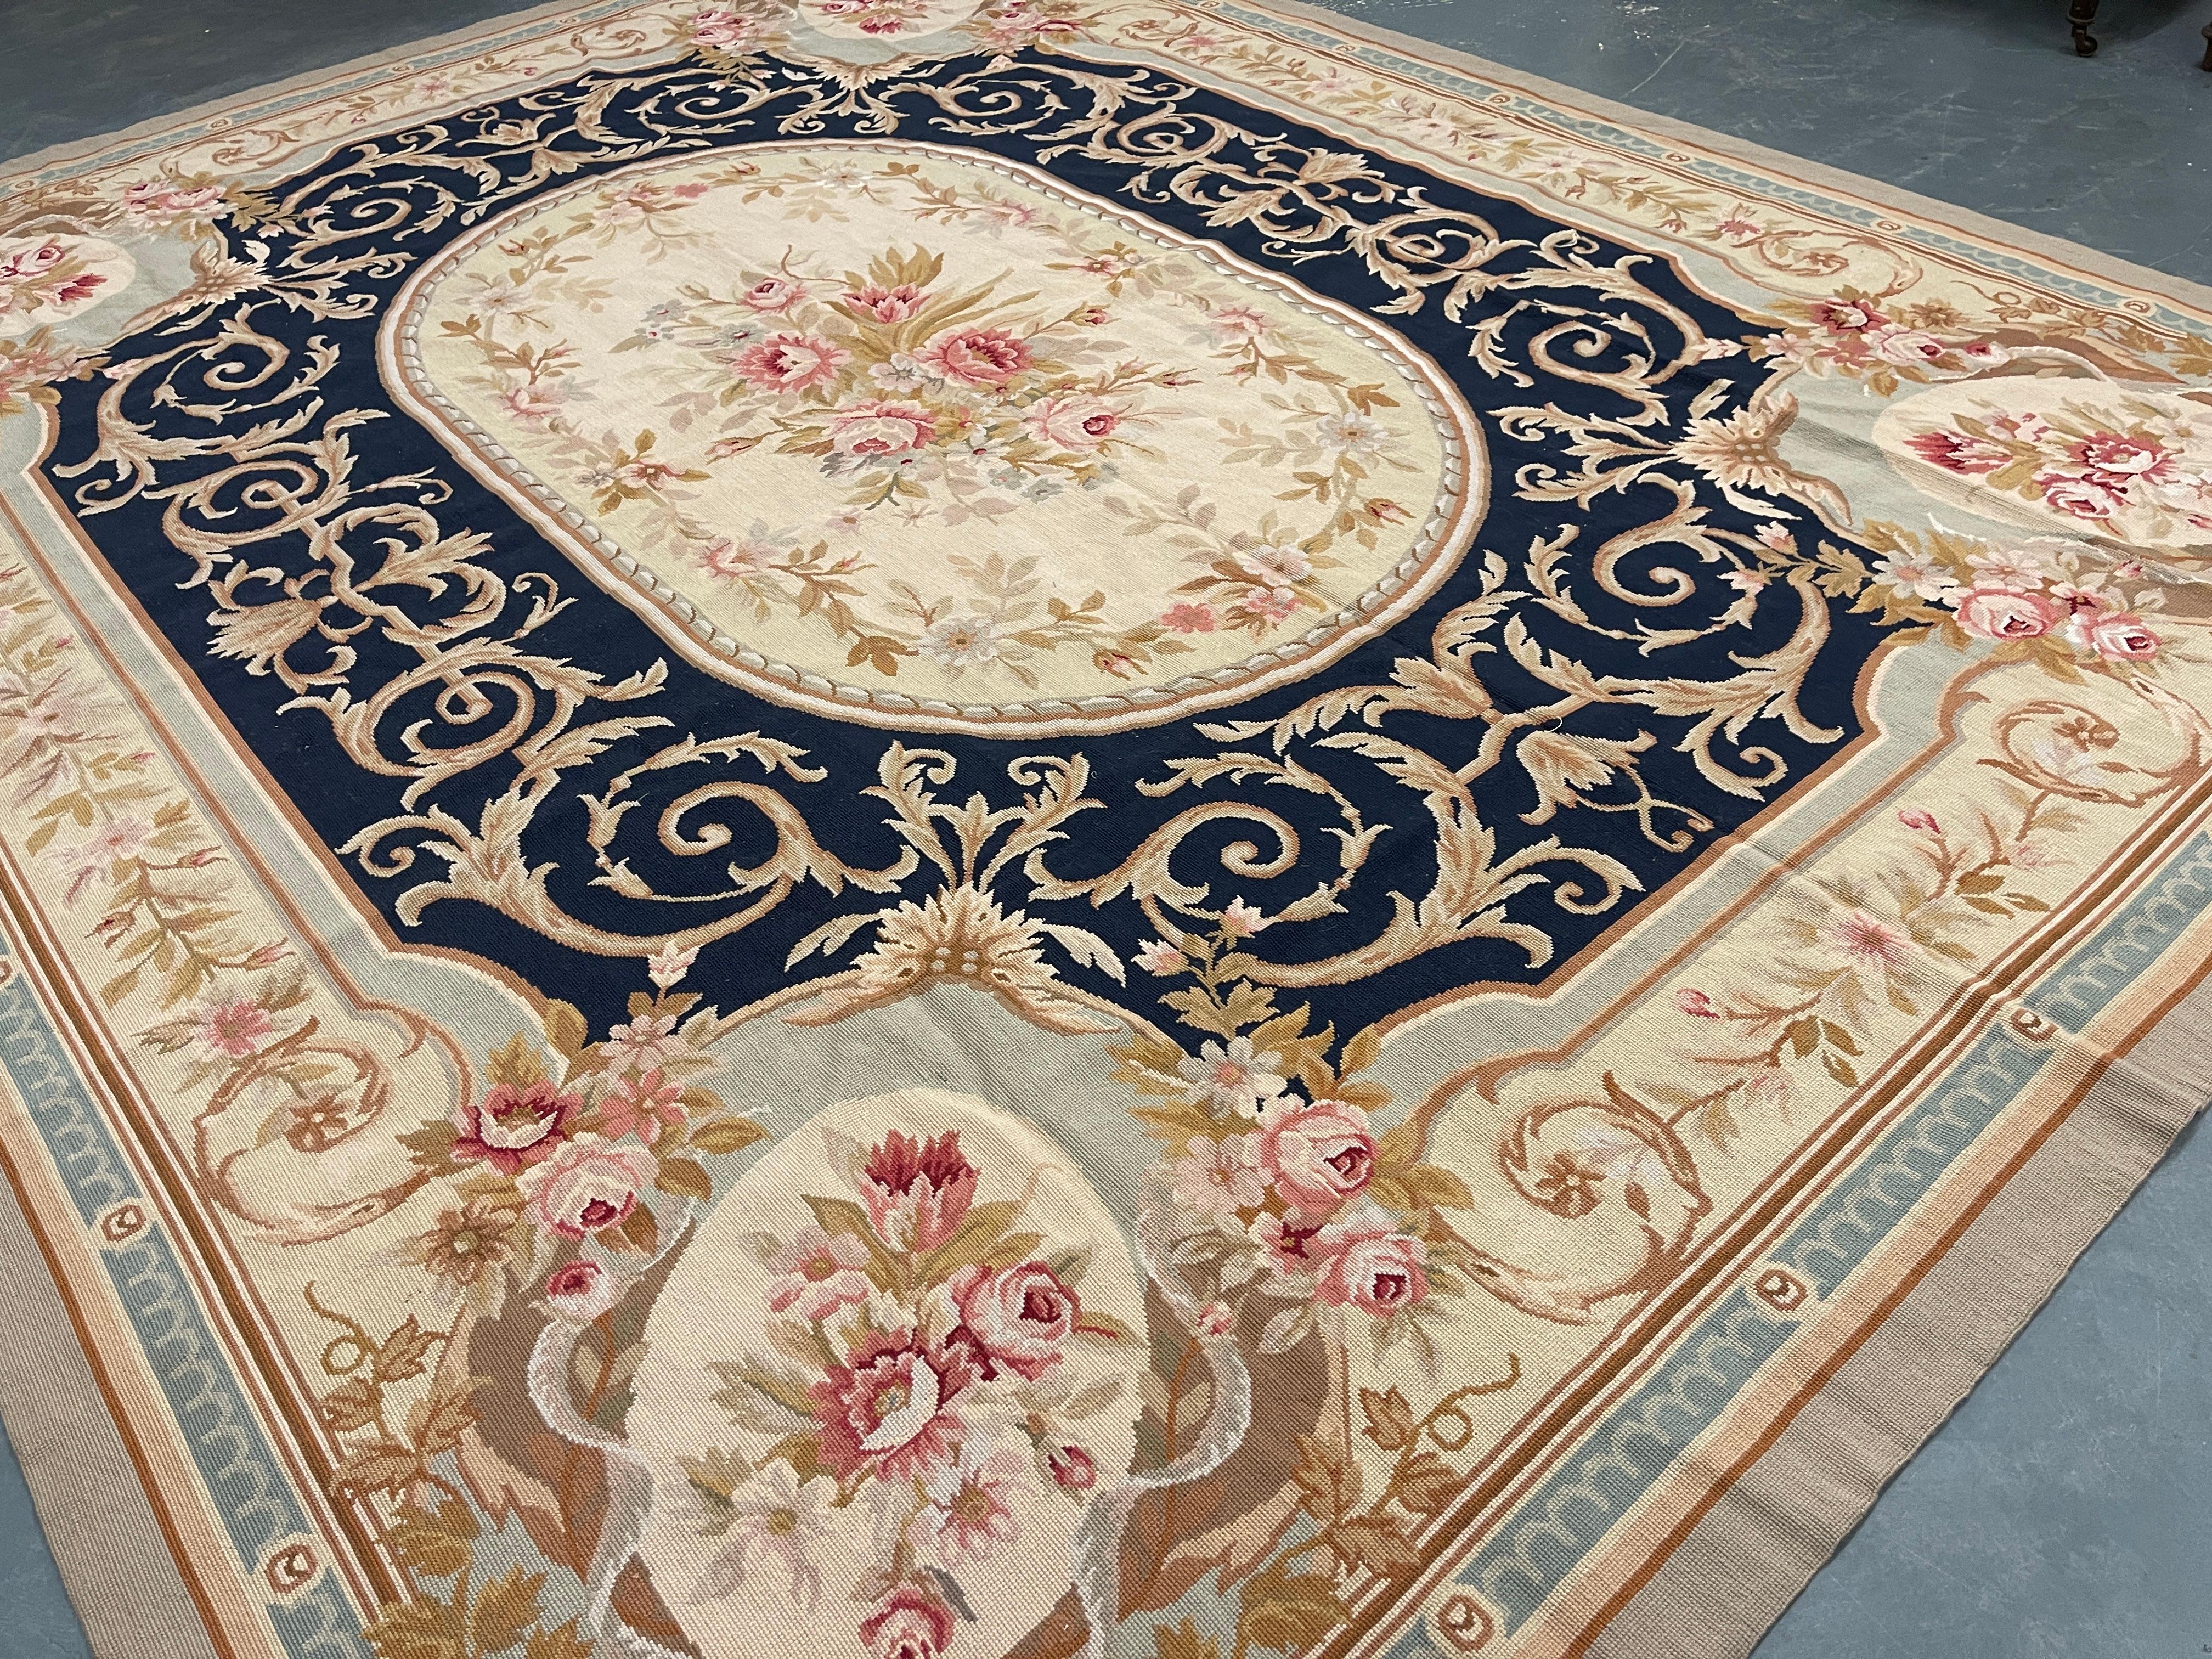 This fantastic area rug has been handwoven with a beautiful symmetrical floral design woven on an ivory blue background with cream green and ivory accents. Both the colour and design of this elegant piece make it the perfect accent rug.
This style